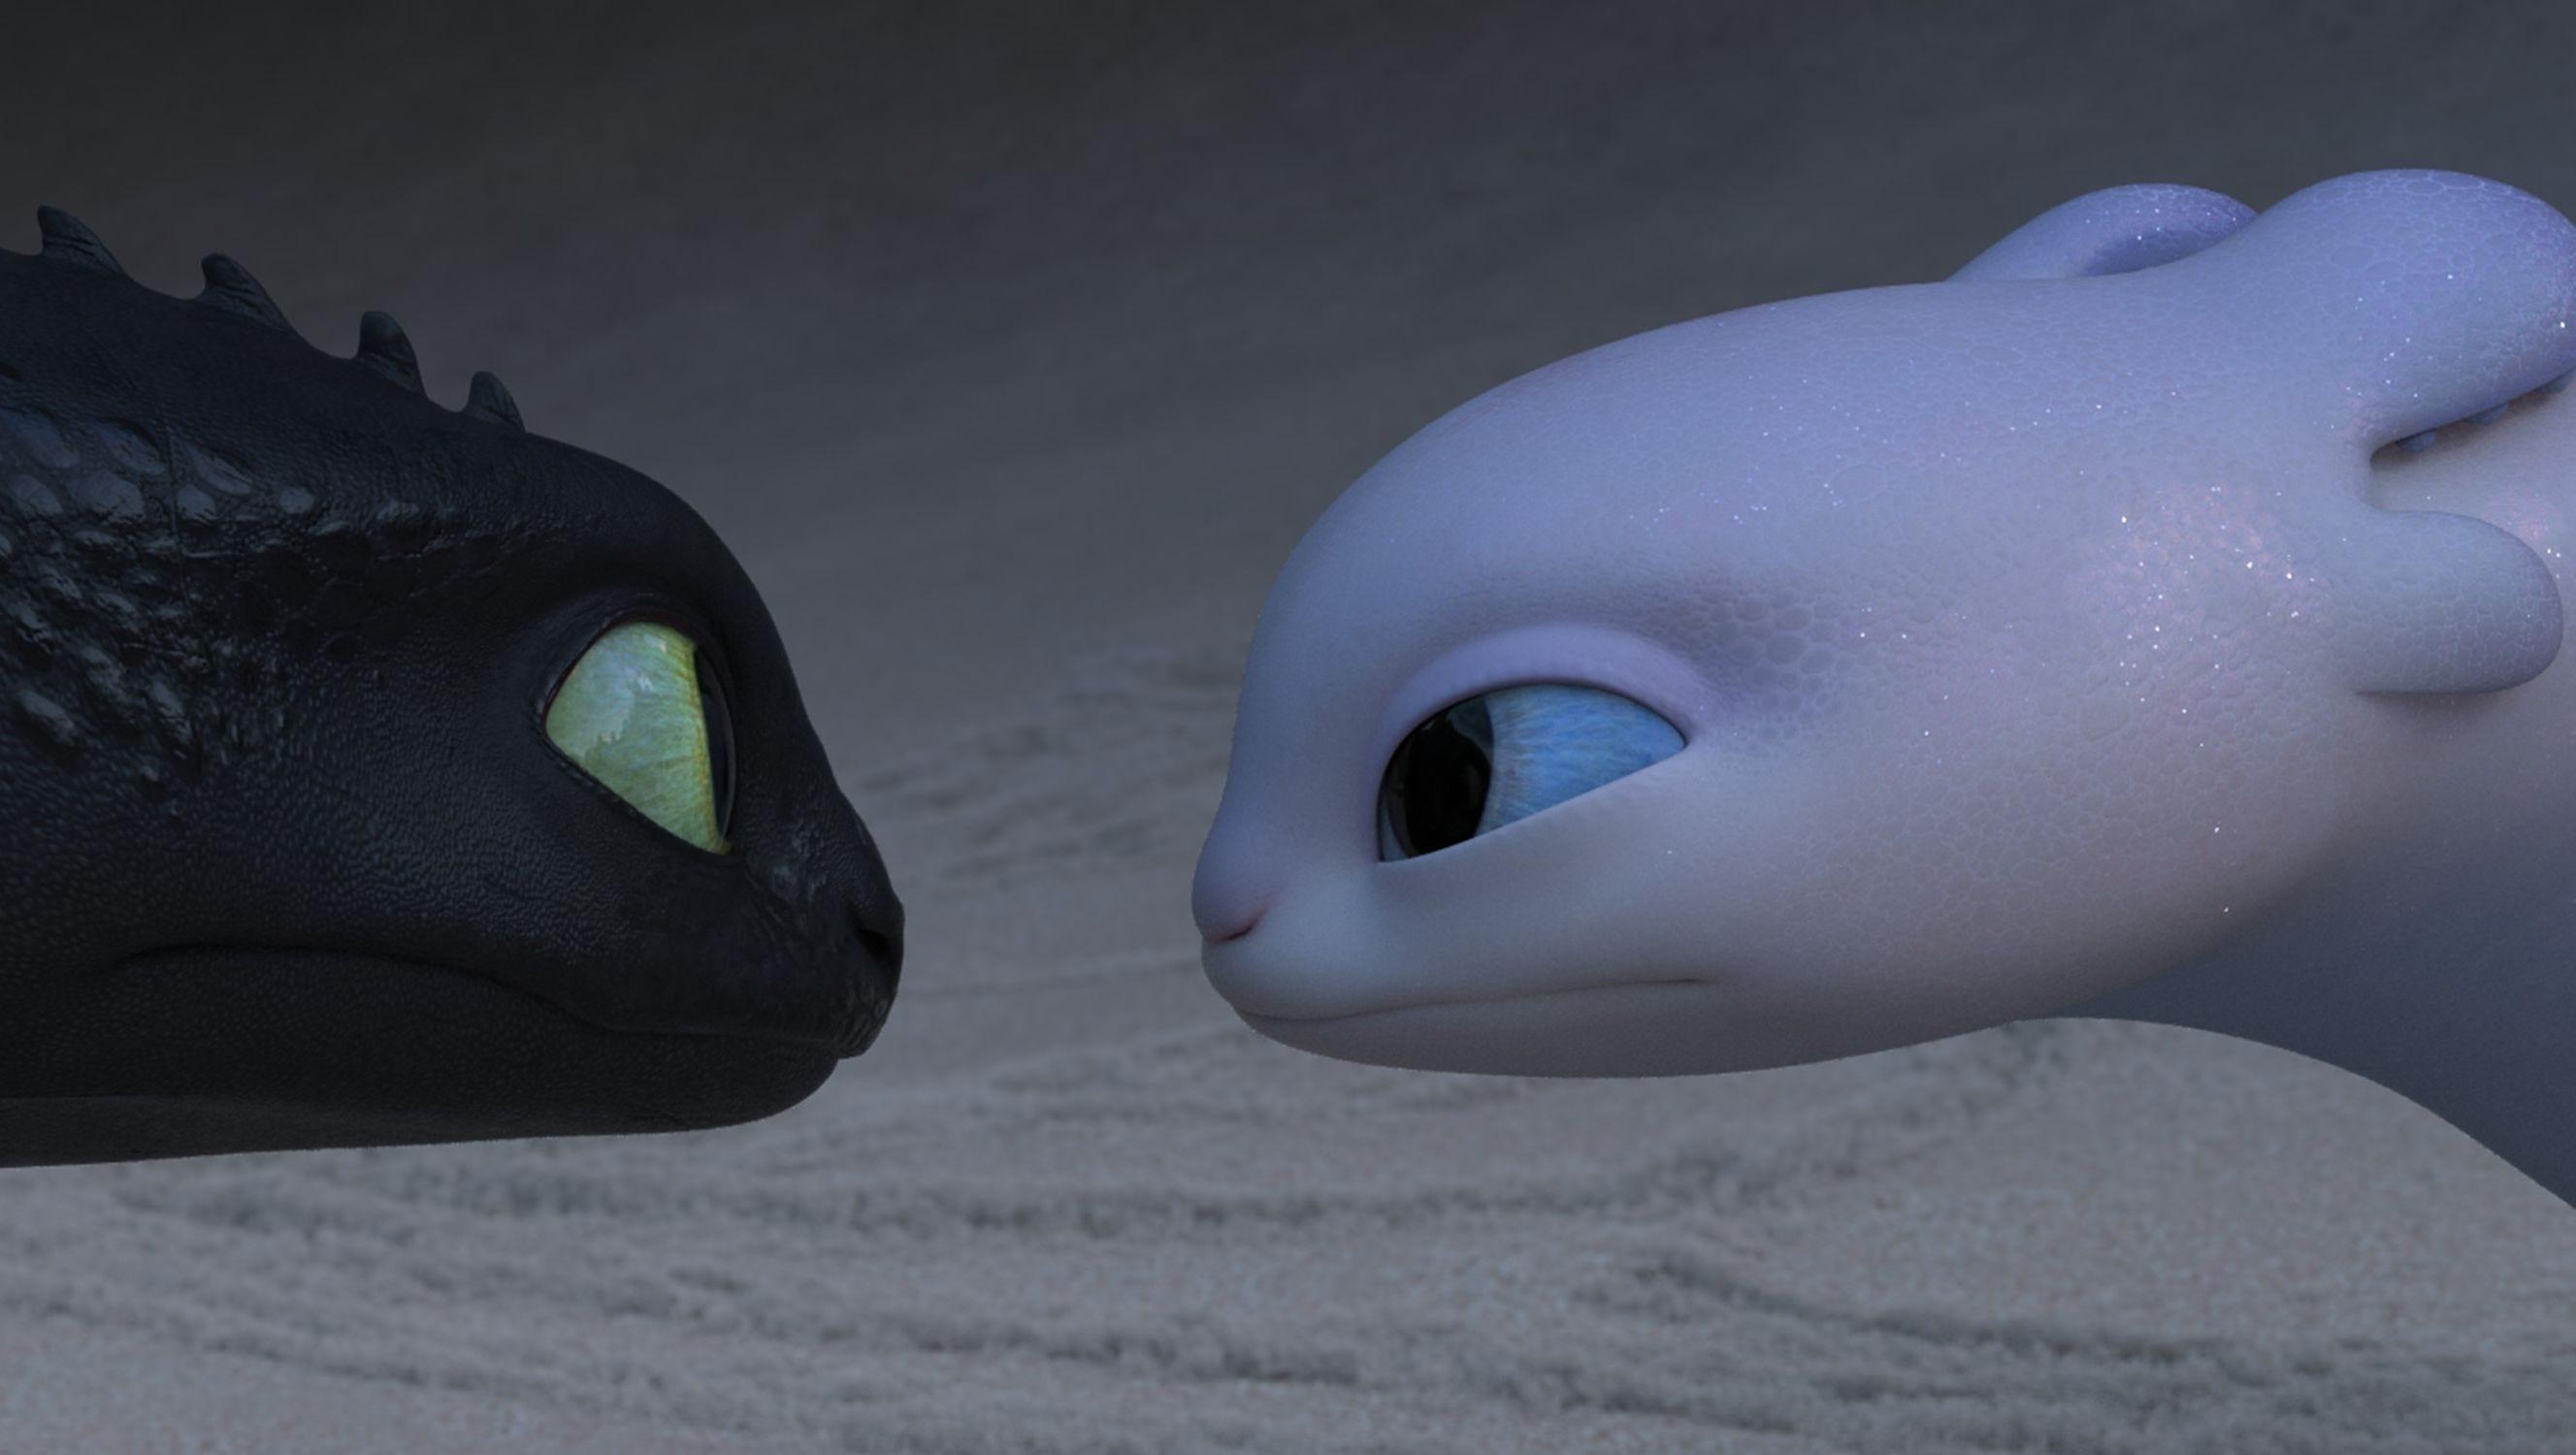 How to Train Your Dragon 3:' New trailer reveals Toothless